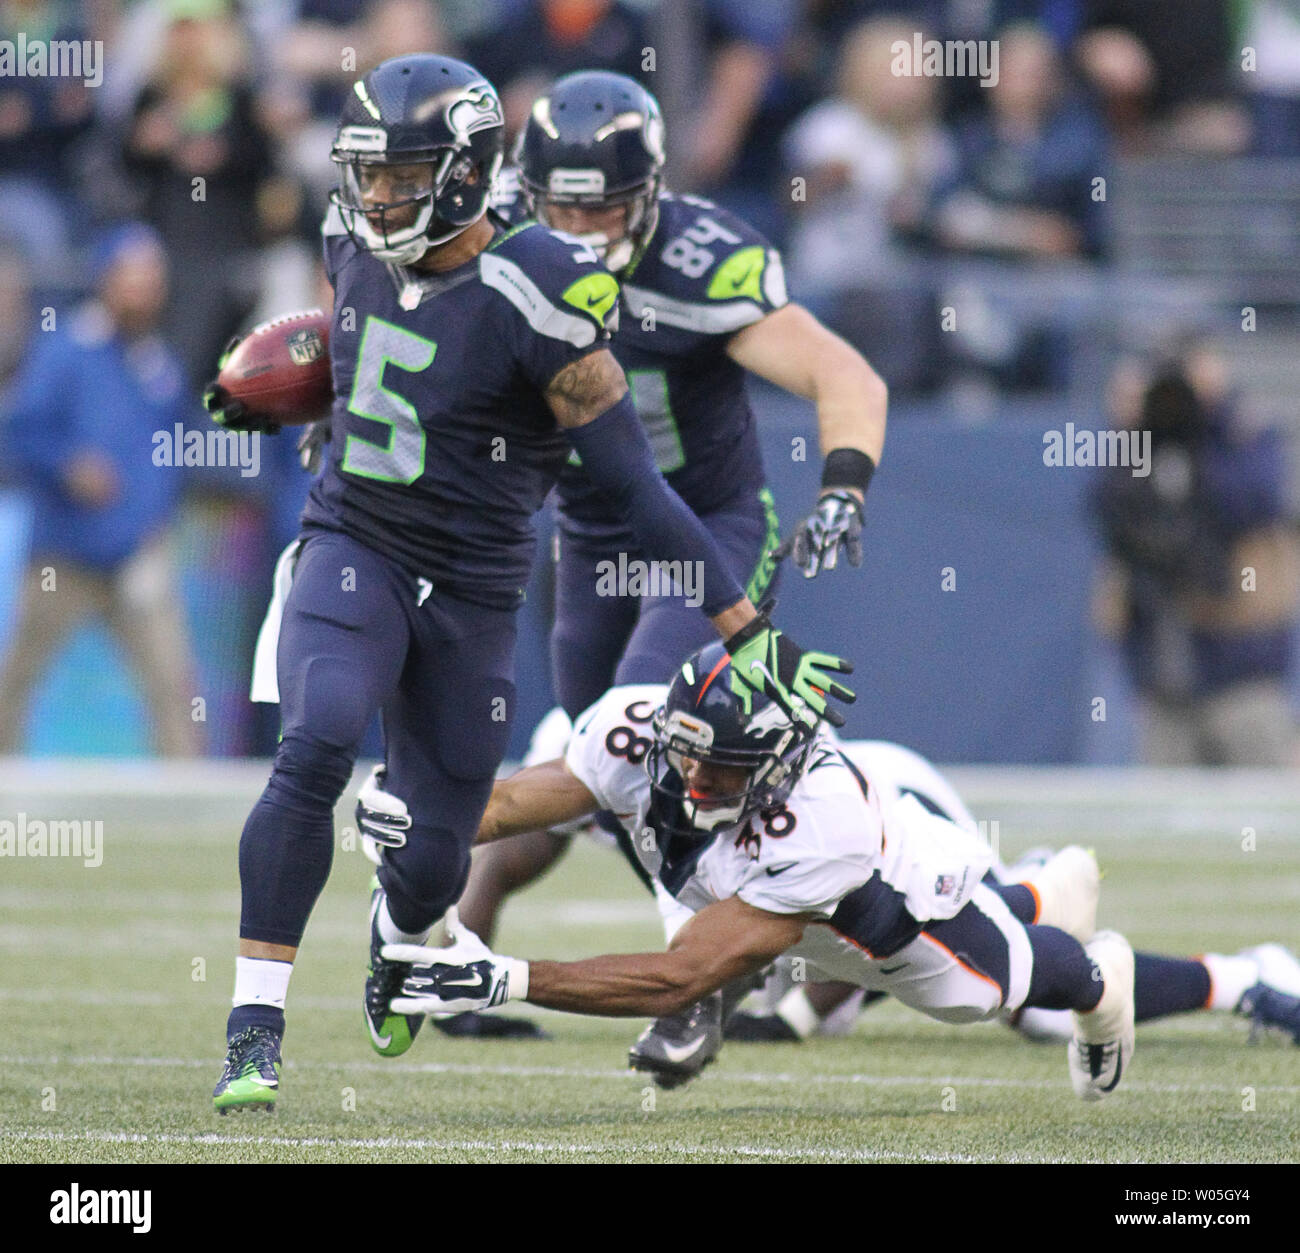 Seattle Seahawks kick off returner B.J. Daniels is tripped up by Denver  Broncos Curtis Marsh after a 35-yard return during the second quarter at  CenturyLink Field on August 14, 2015 in Seattle